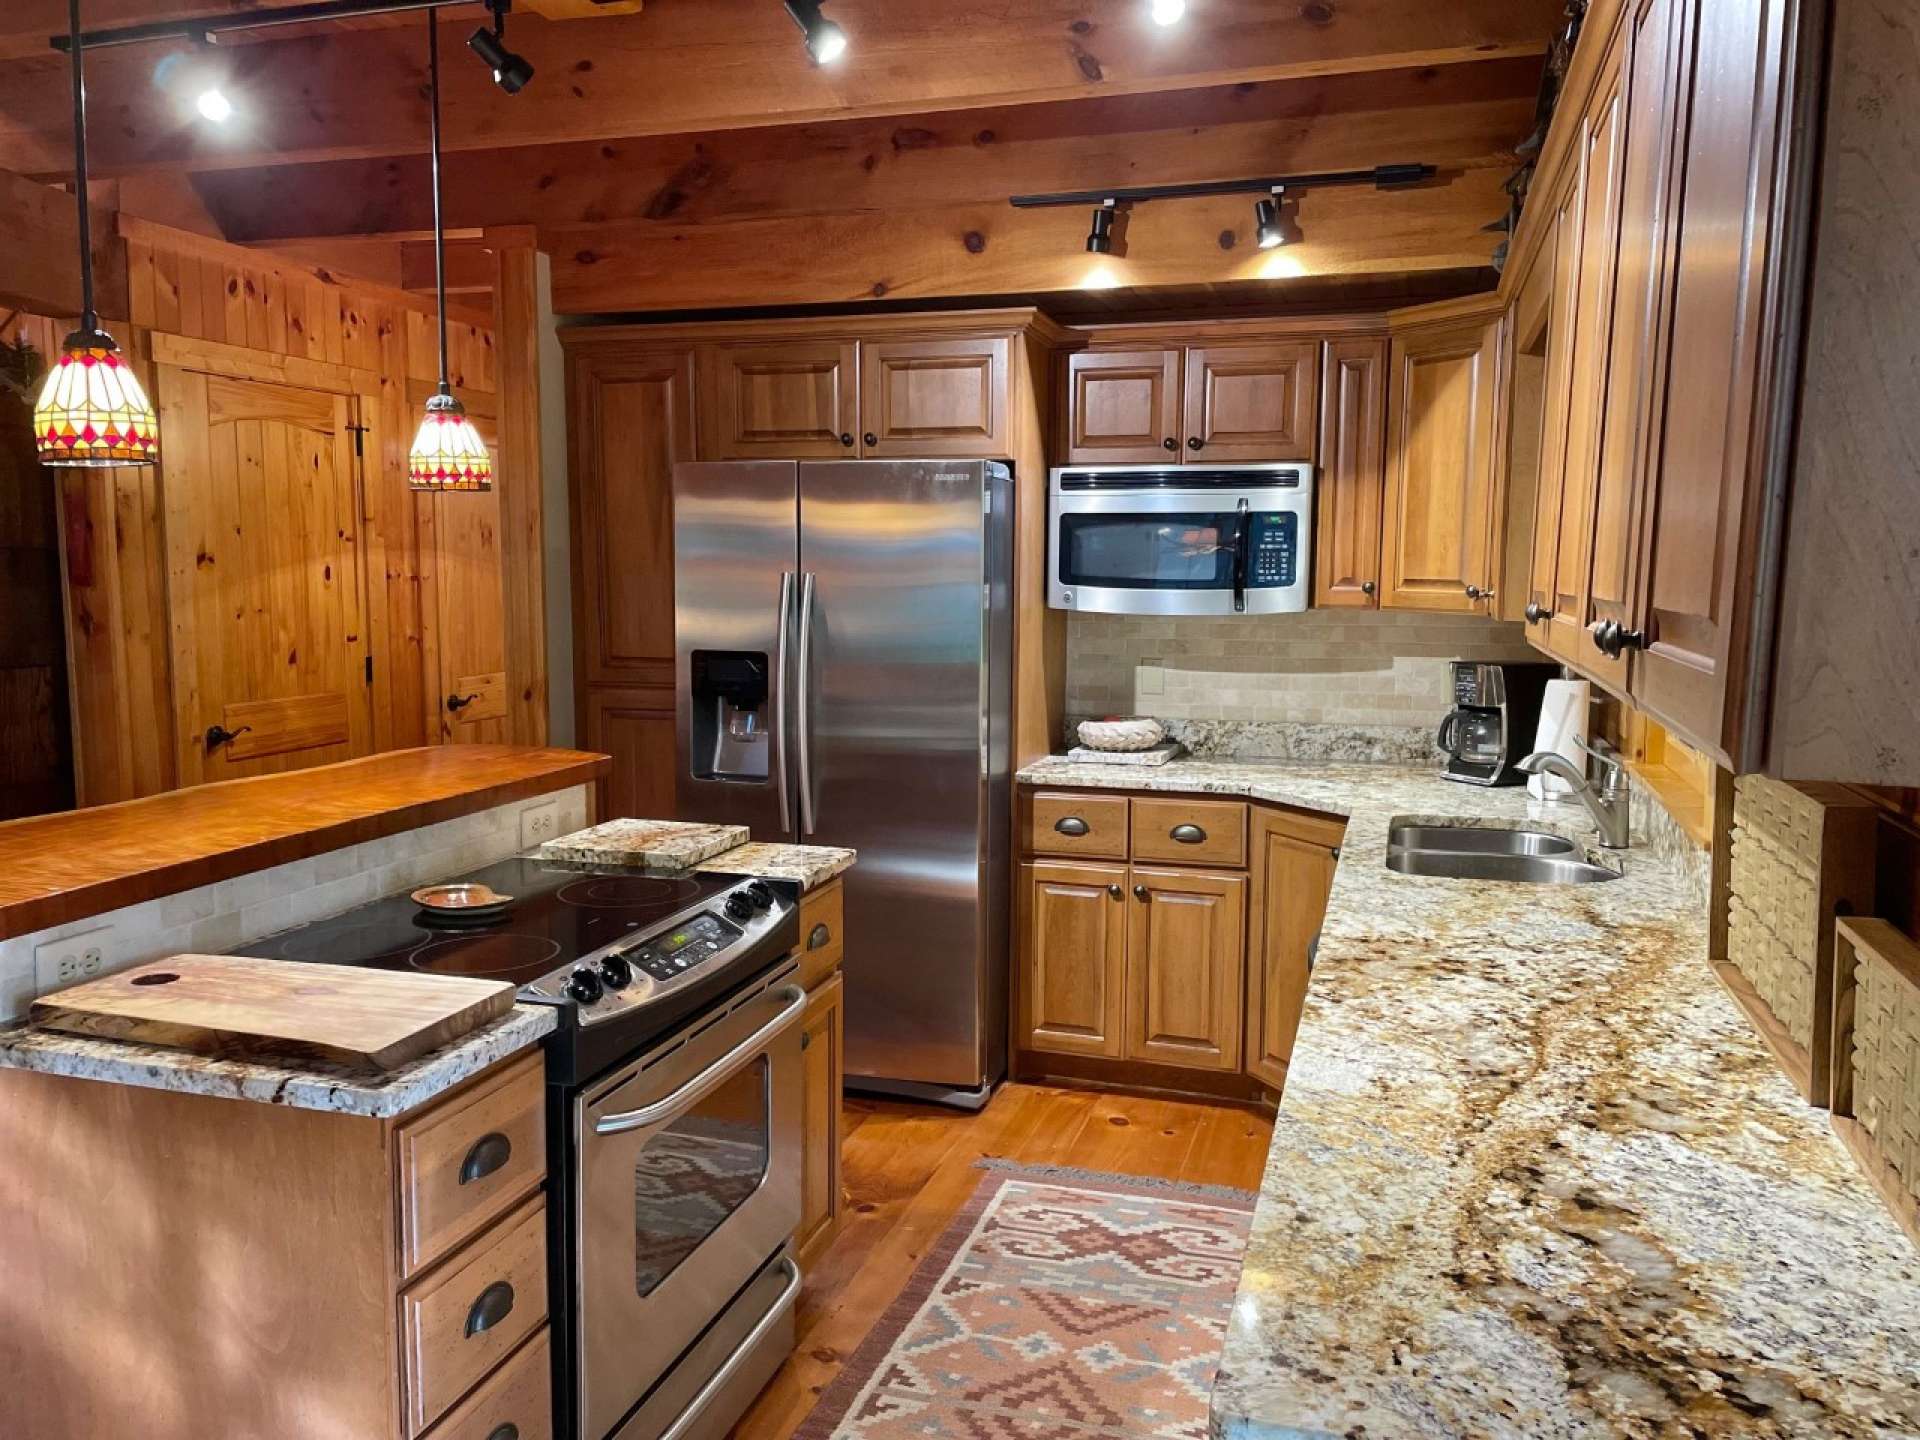 Check out those granite countertops!